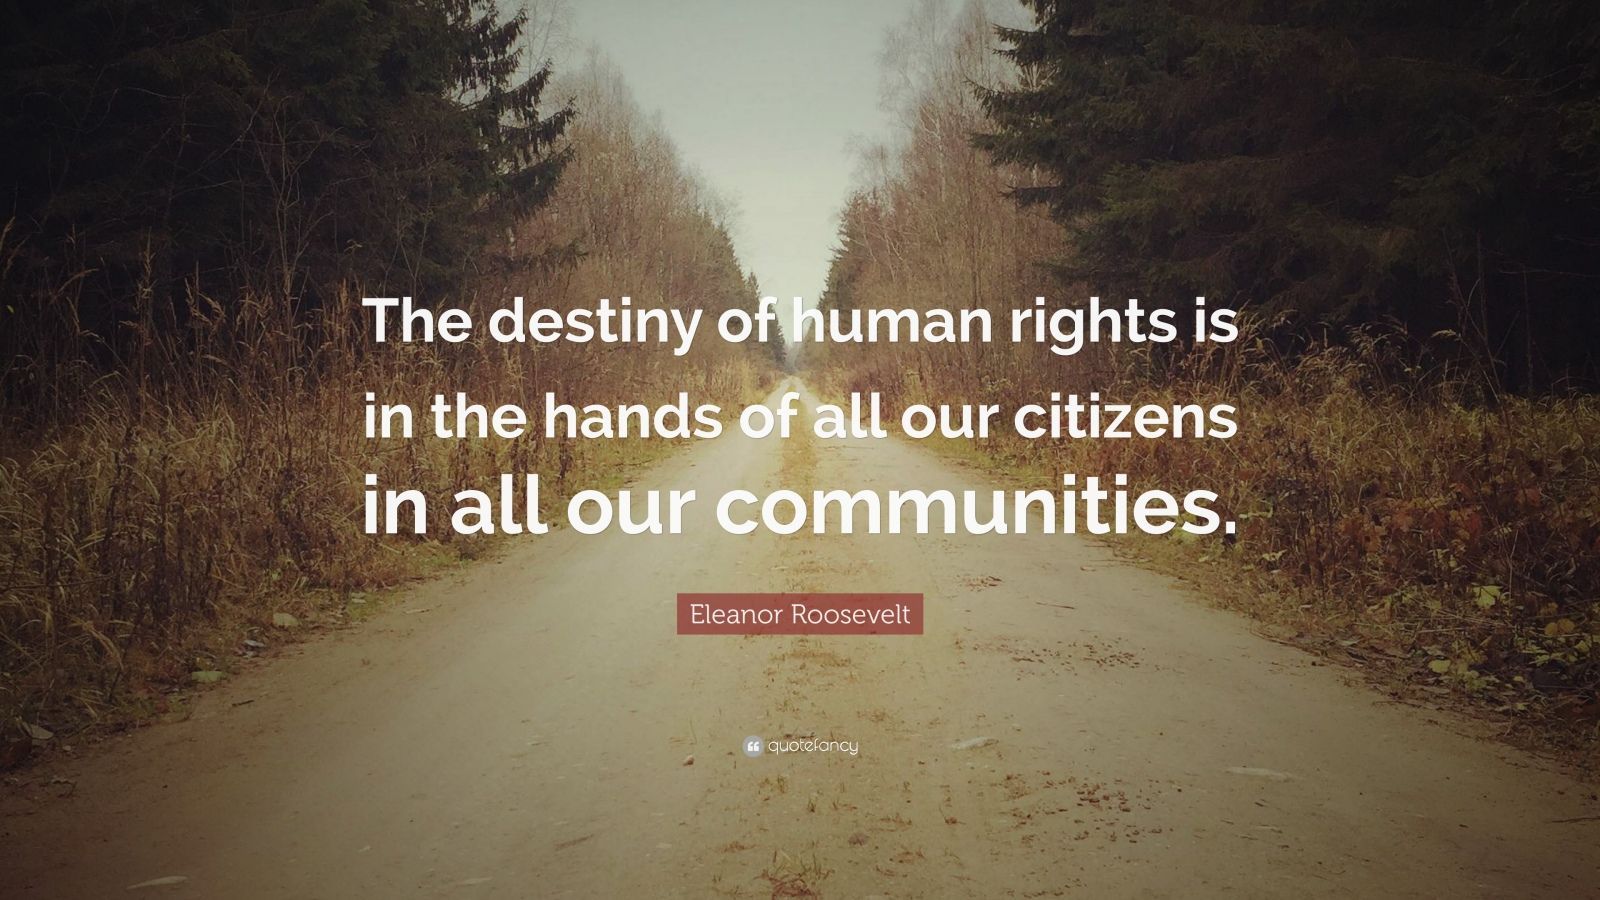 Eleanor Roosevelt Quote: “The destiny of human rights is in the hands of all our citizens in all our communities.”